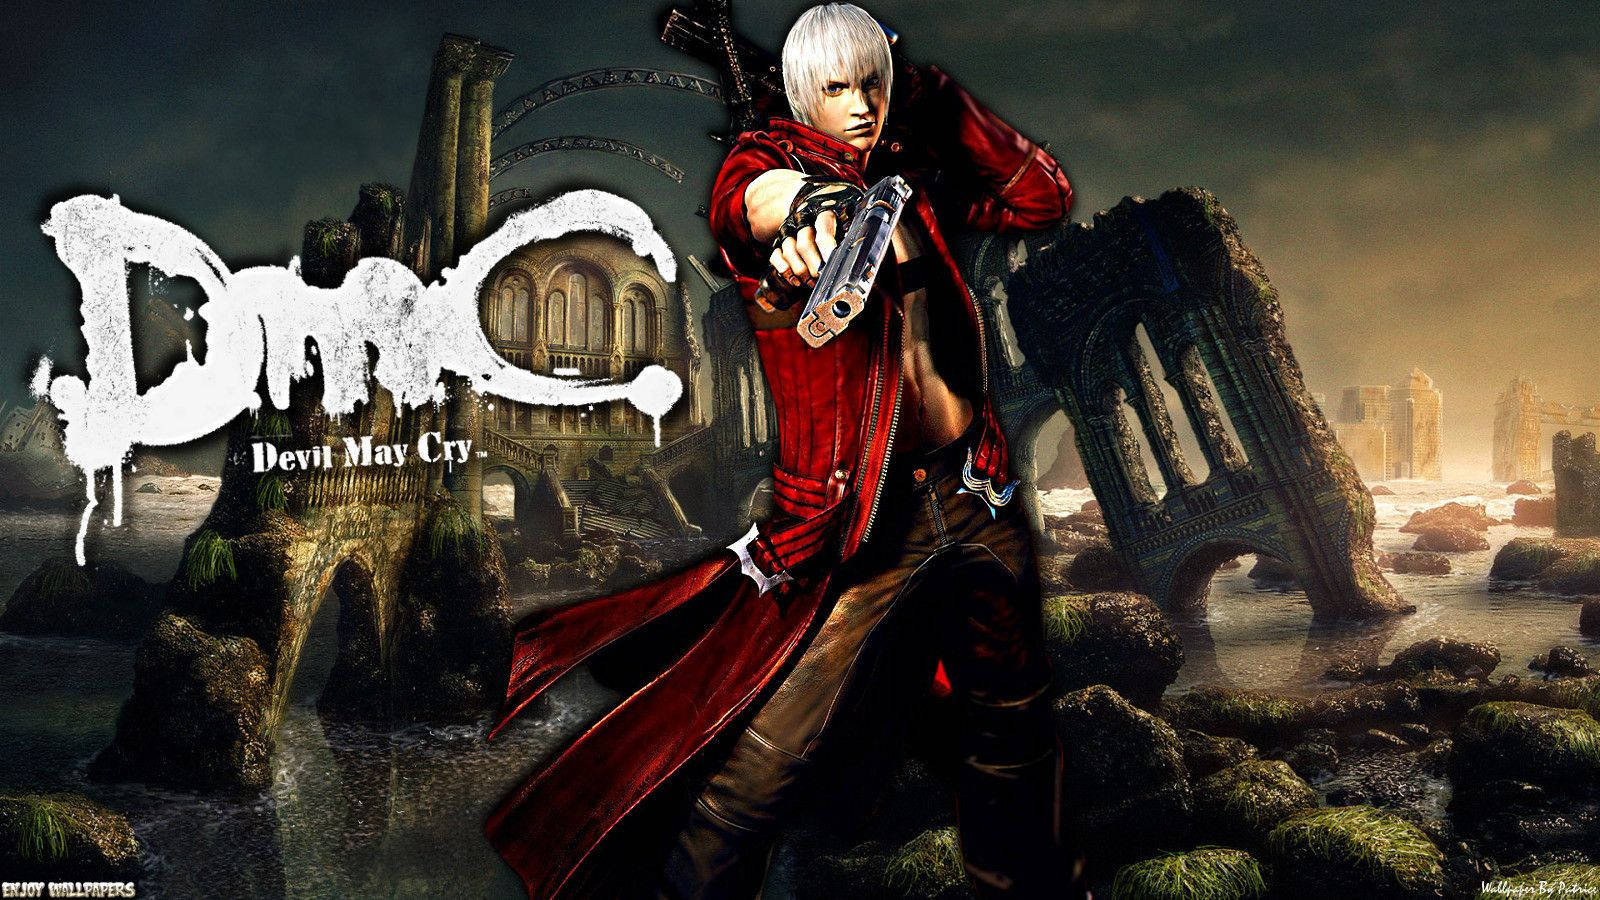 Devil May Cry Dante And Logo Poster Wallpaper